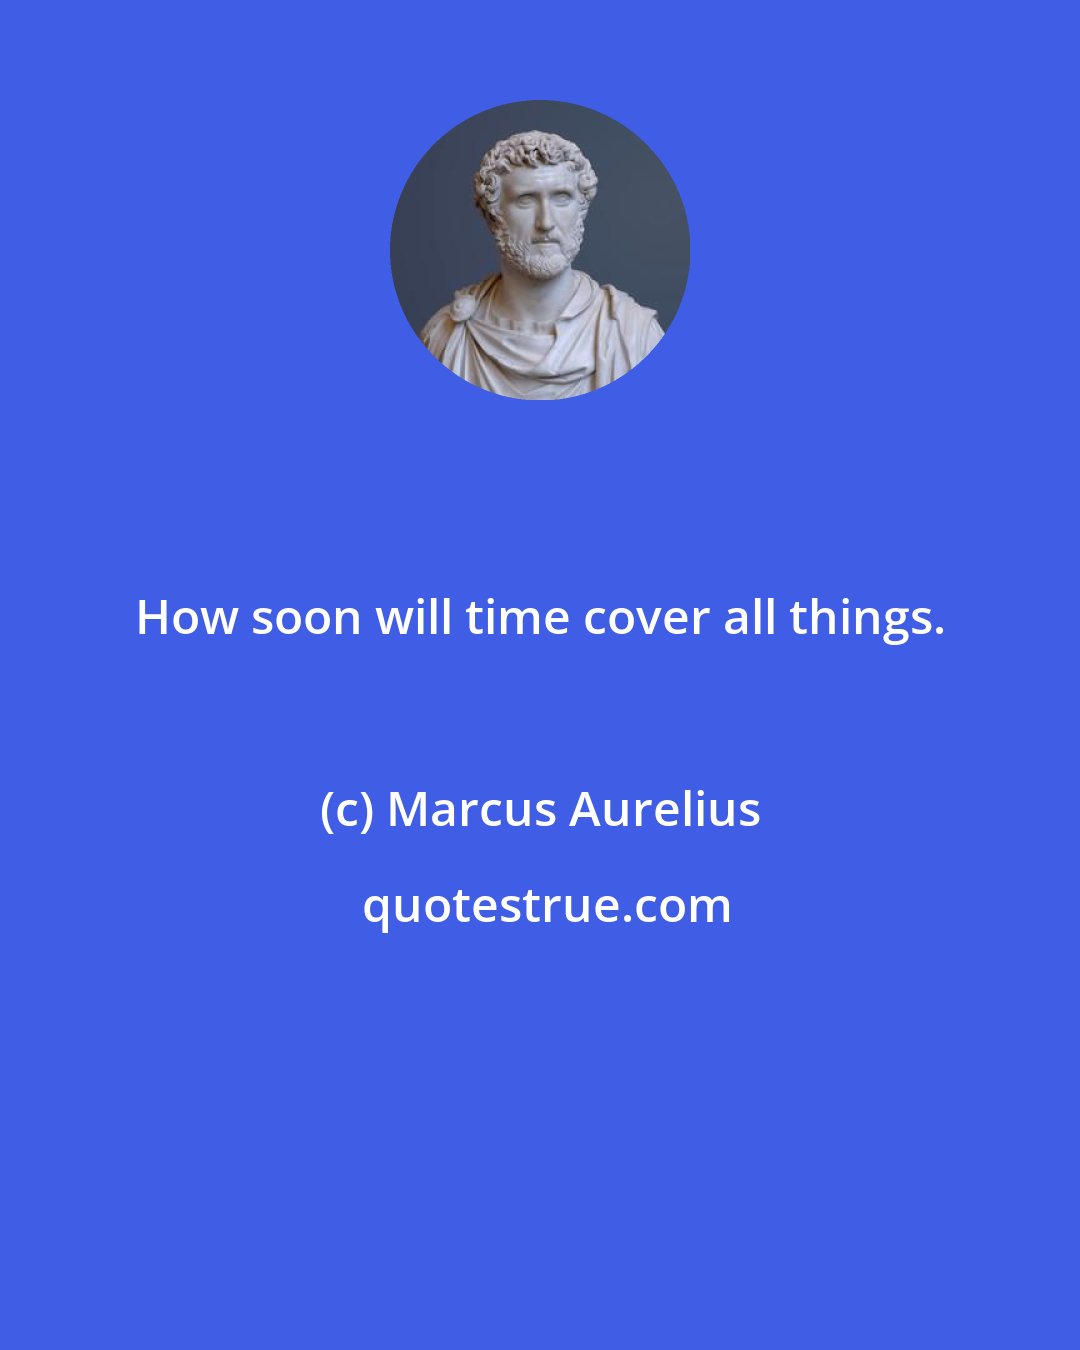 Marcus Aurelius: How soon will time cover all things.